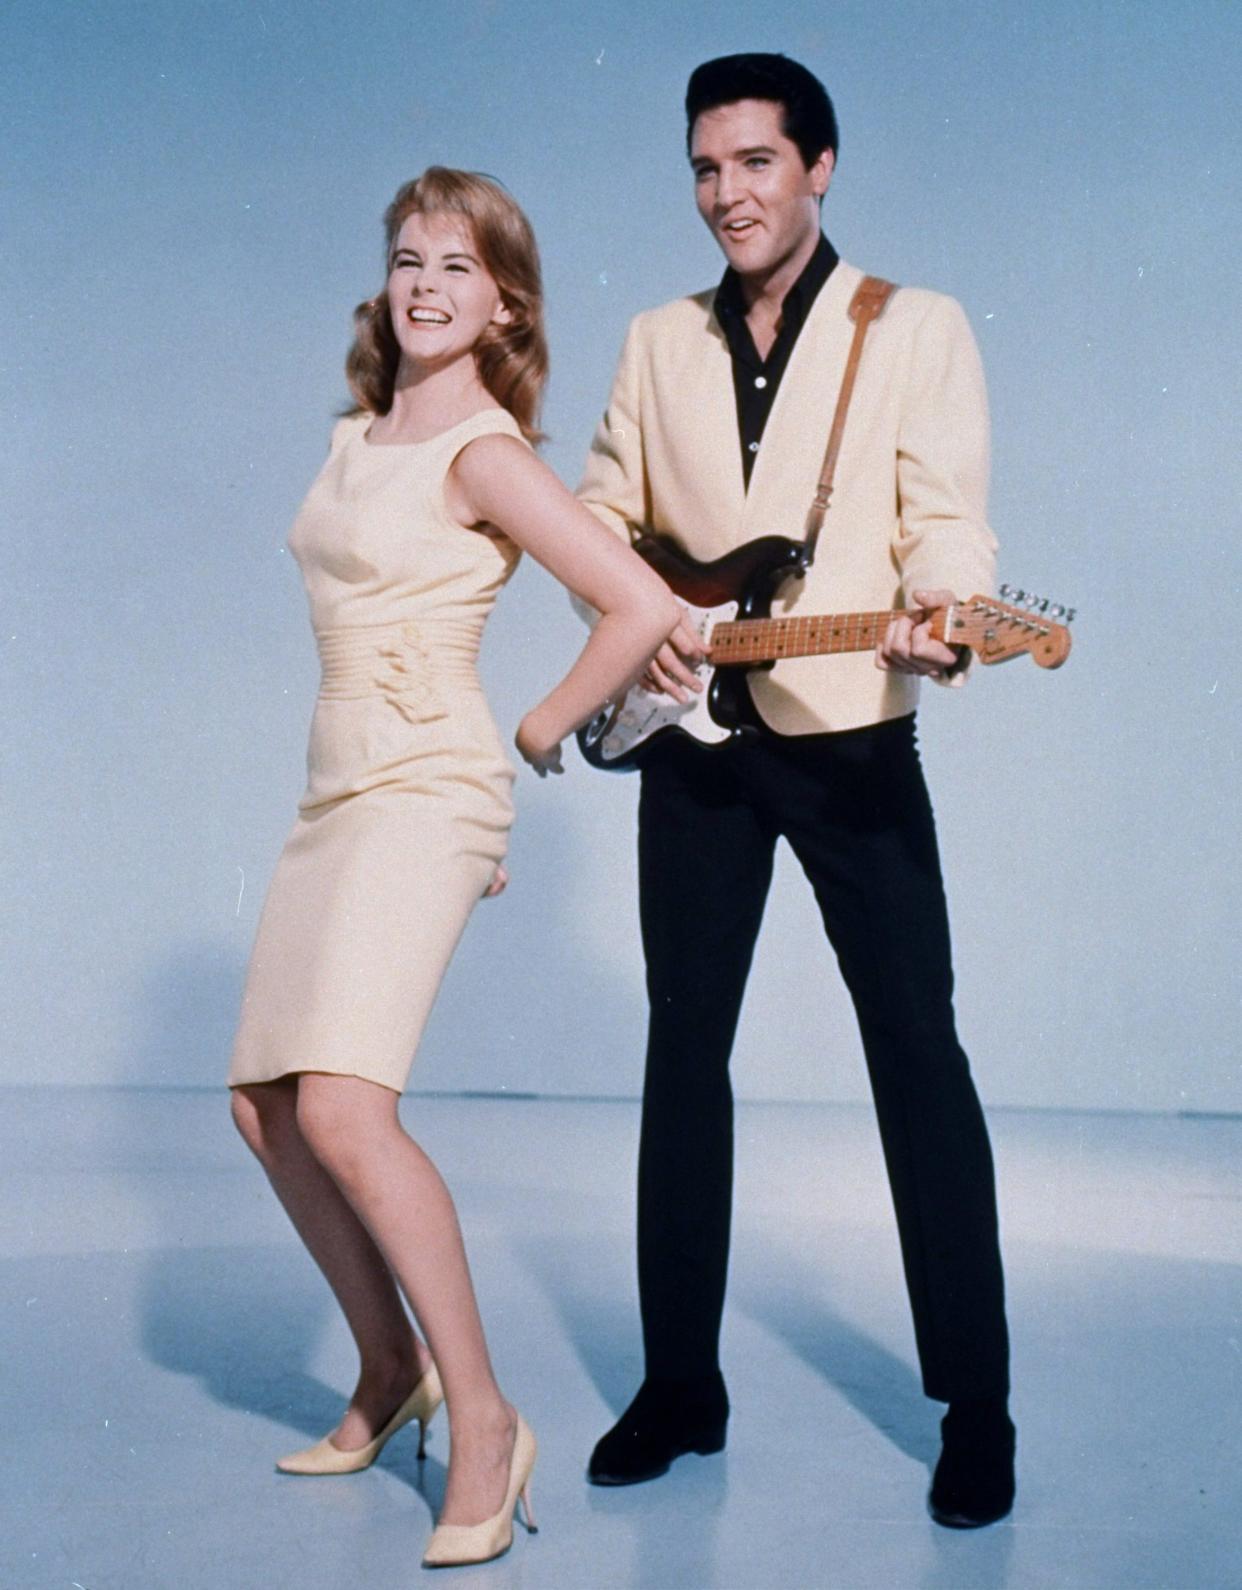 Elvis Presley and actress Ann-Margret shown in an MGM Studios-supplied publicity photo for the 1964 film, "Viva Las Vegas." (AP Photo/MGM Studios)